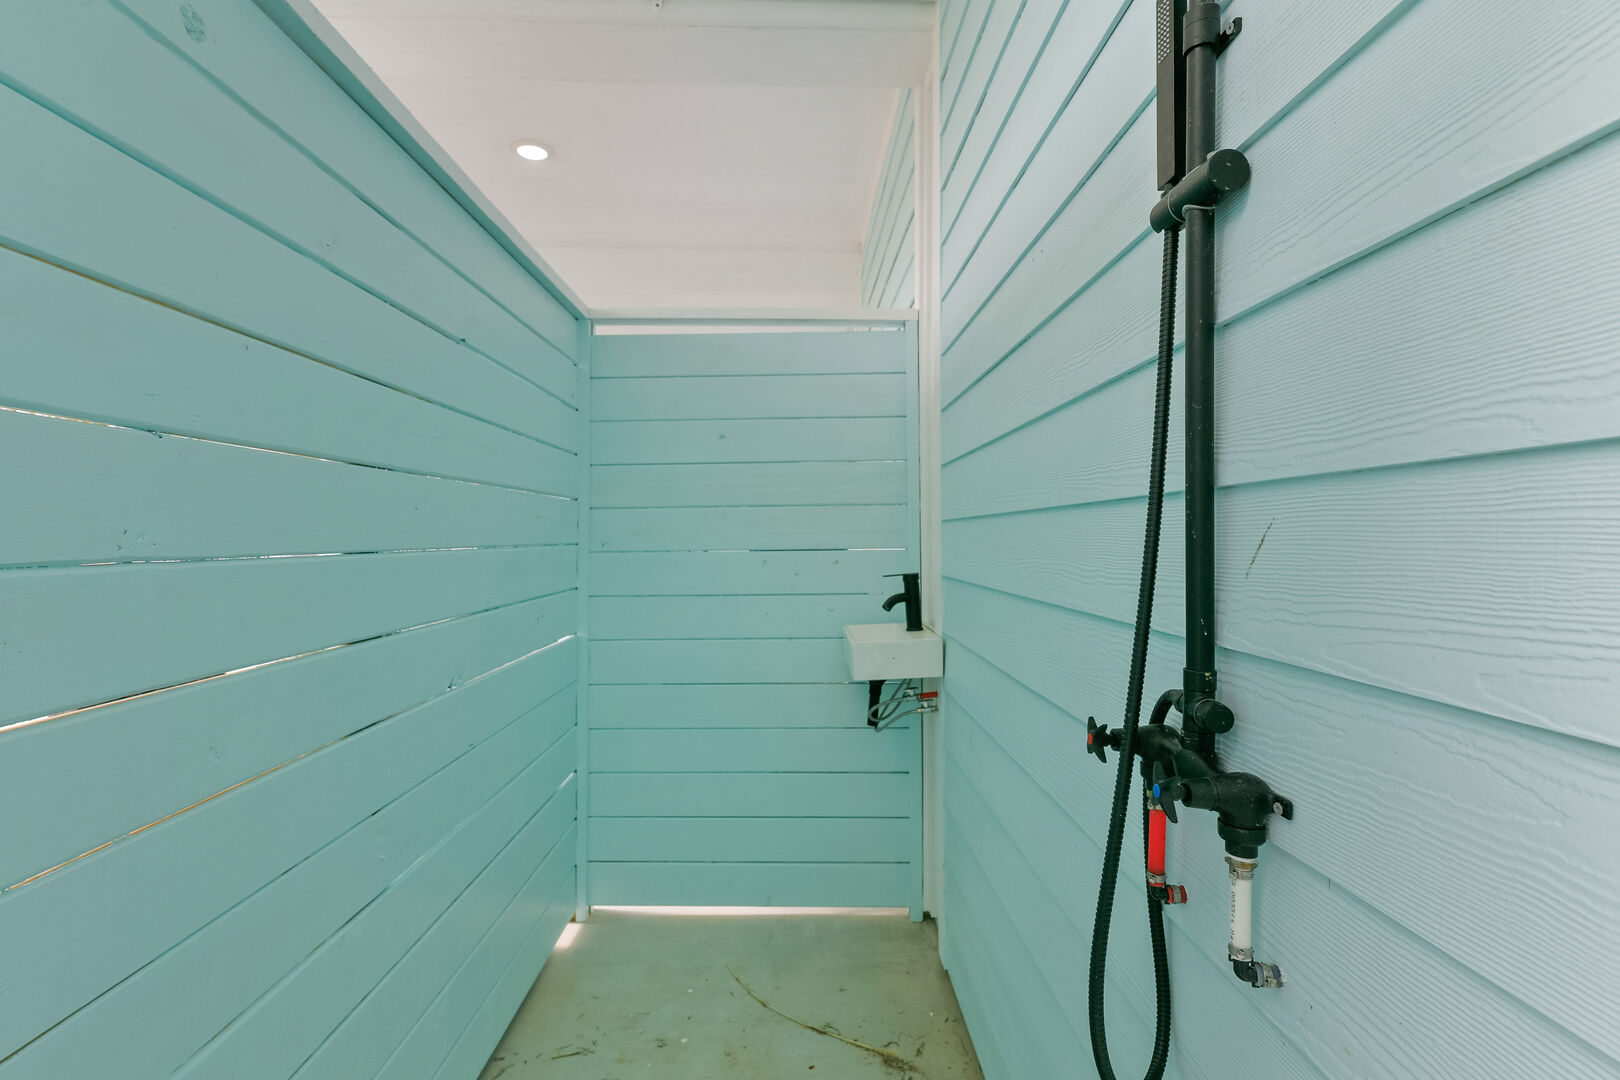 IF YOU'VE TAKEN THE SHORT WALK TO THE BEACH, AN OUTDOOR SHOWER IS LOCATED DOWNSTAIRS